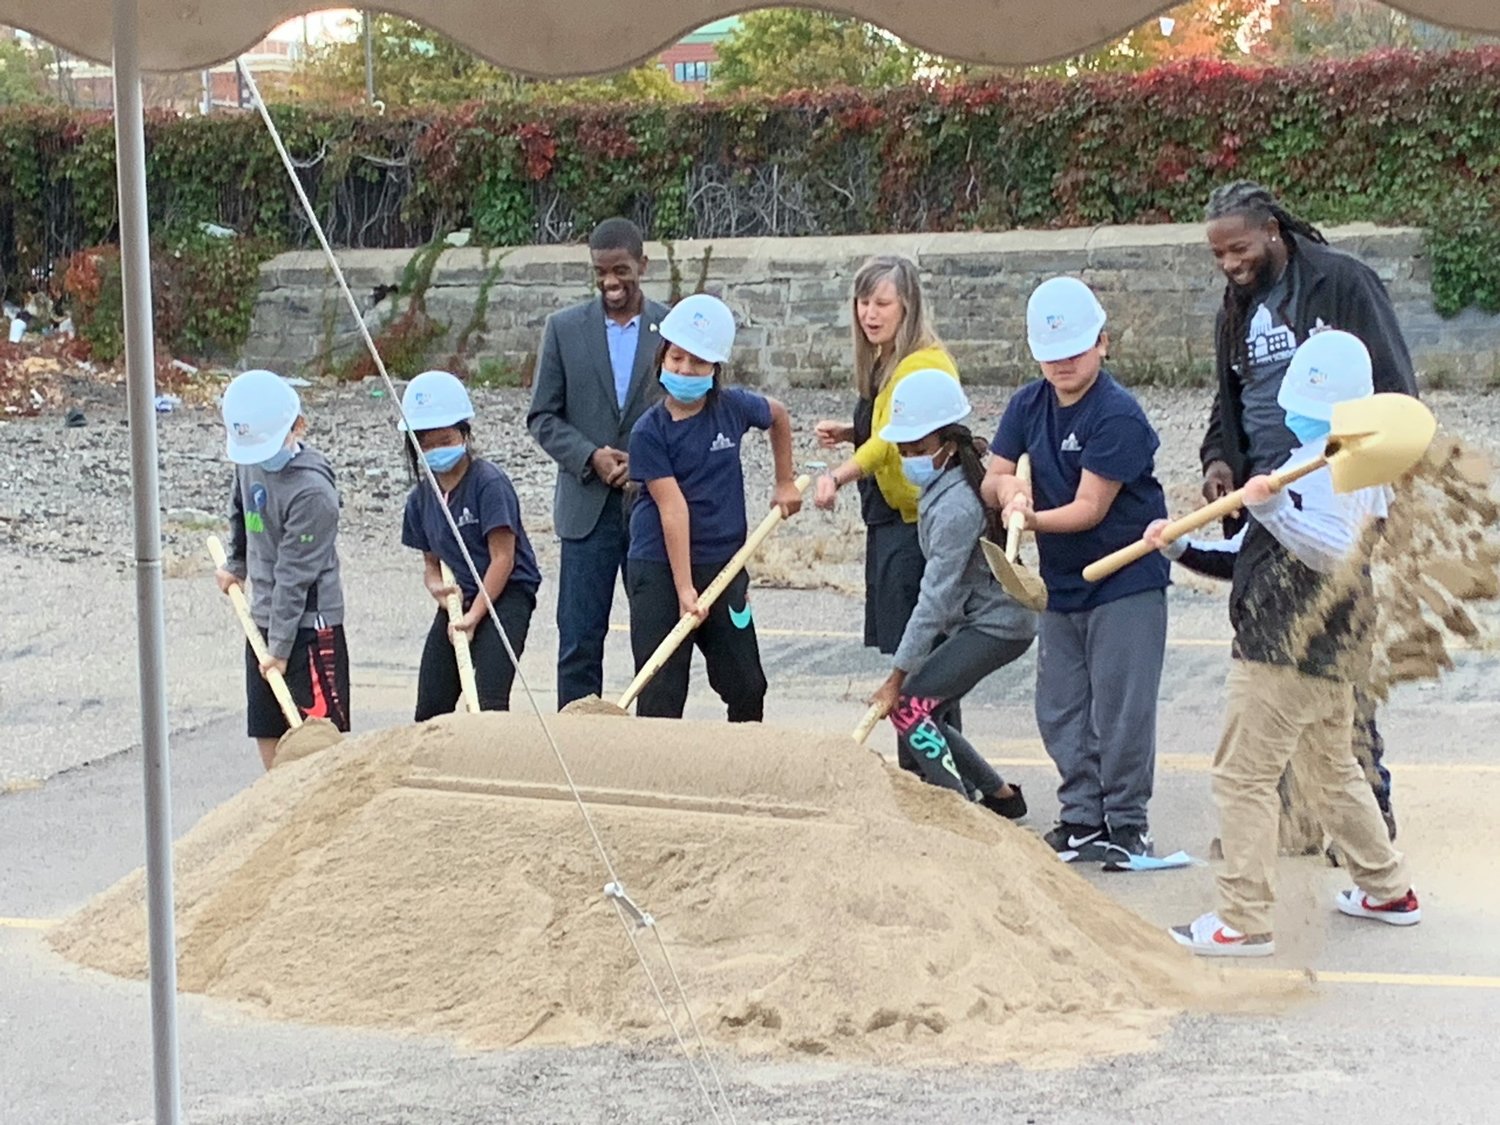 St. Paul City School officially breaks ground with Mayor Melvin Carter and Ms. Ritter’s 5th grade class on its new building at 215 University Ave. (Photo submitted)